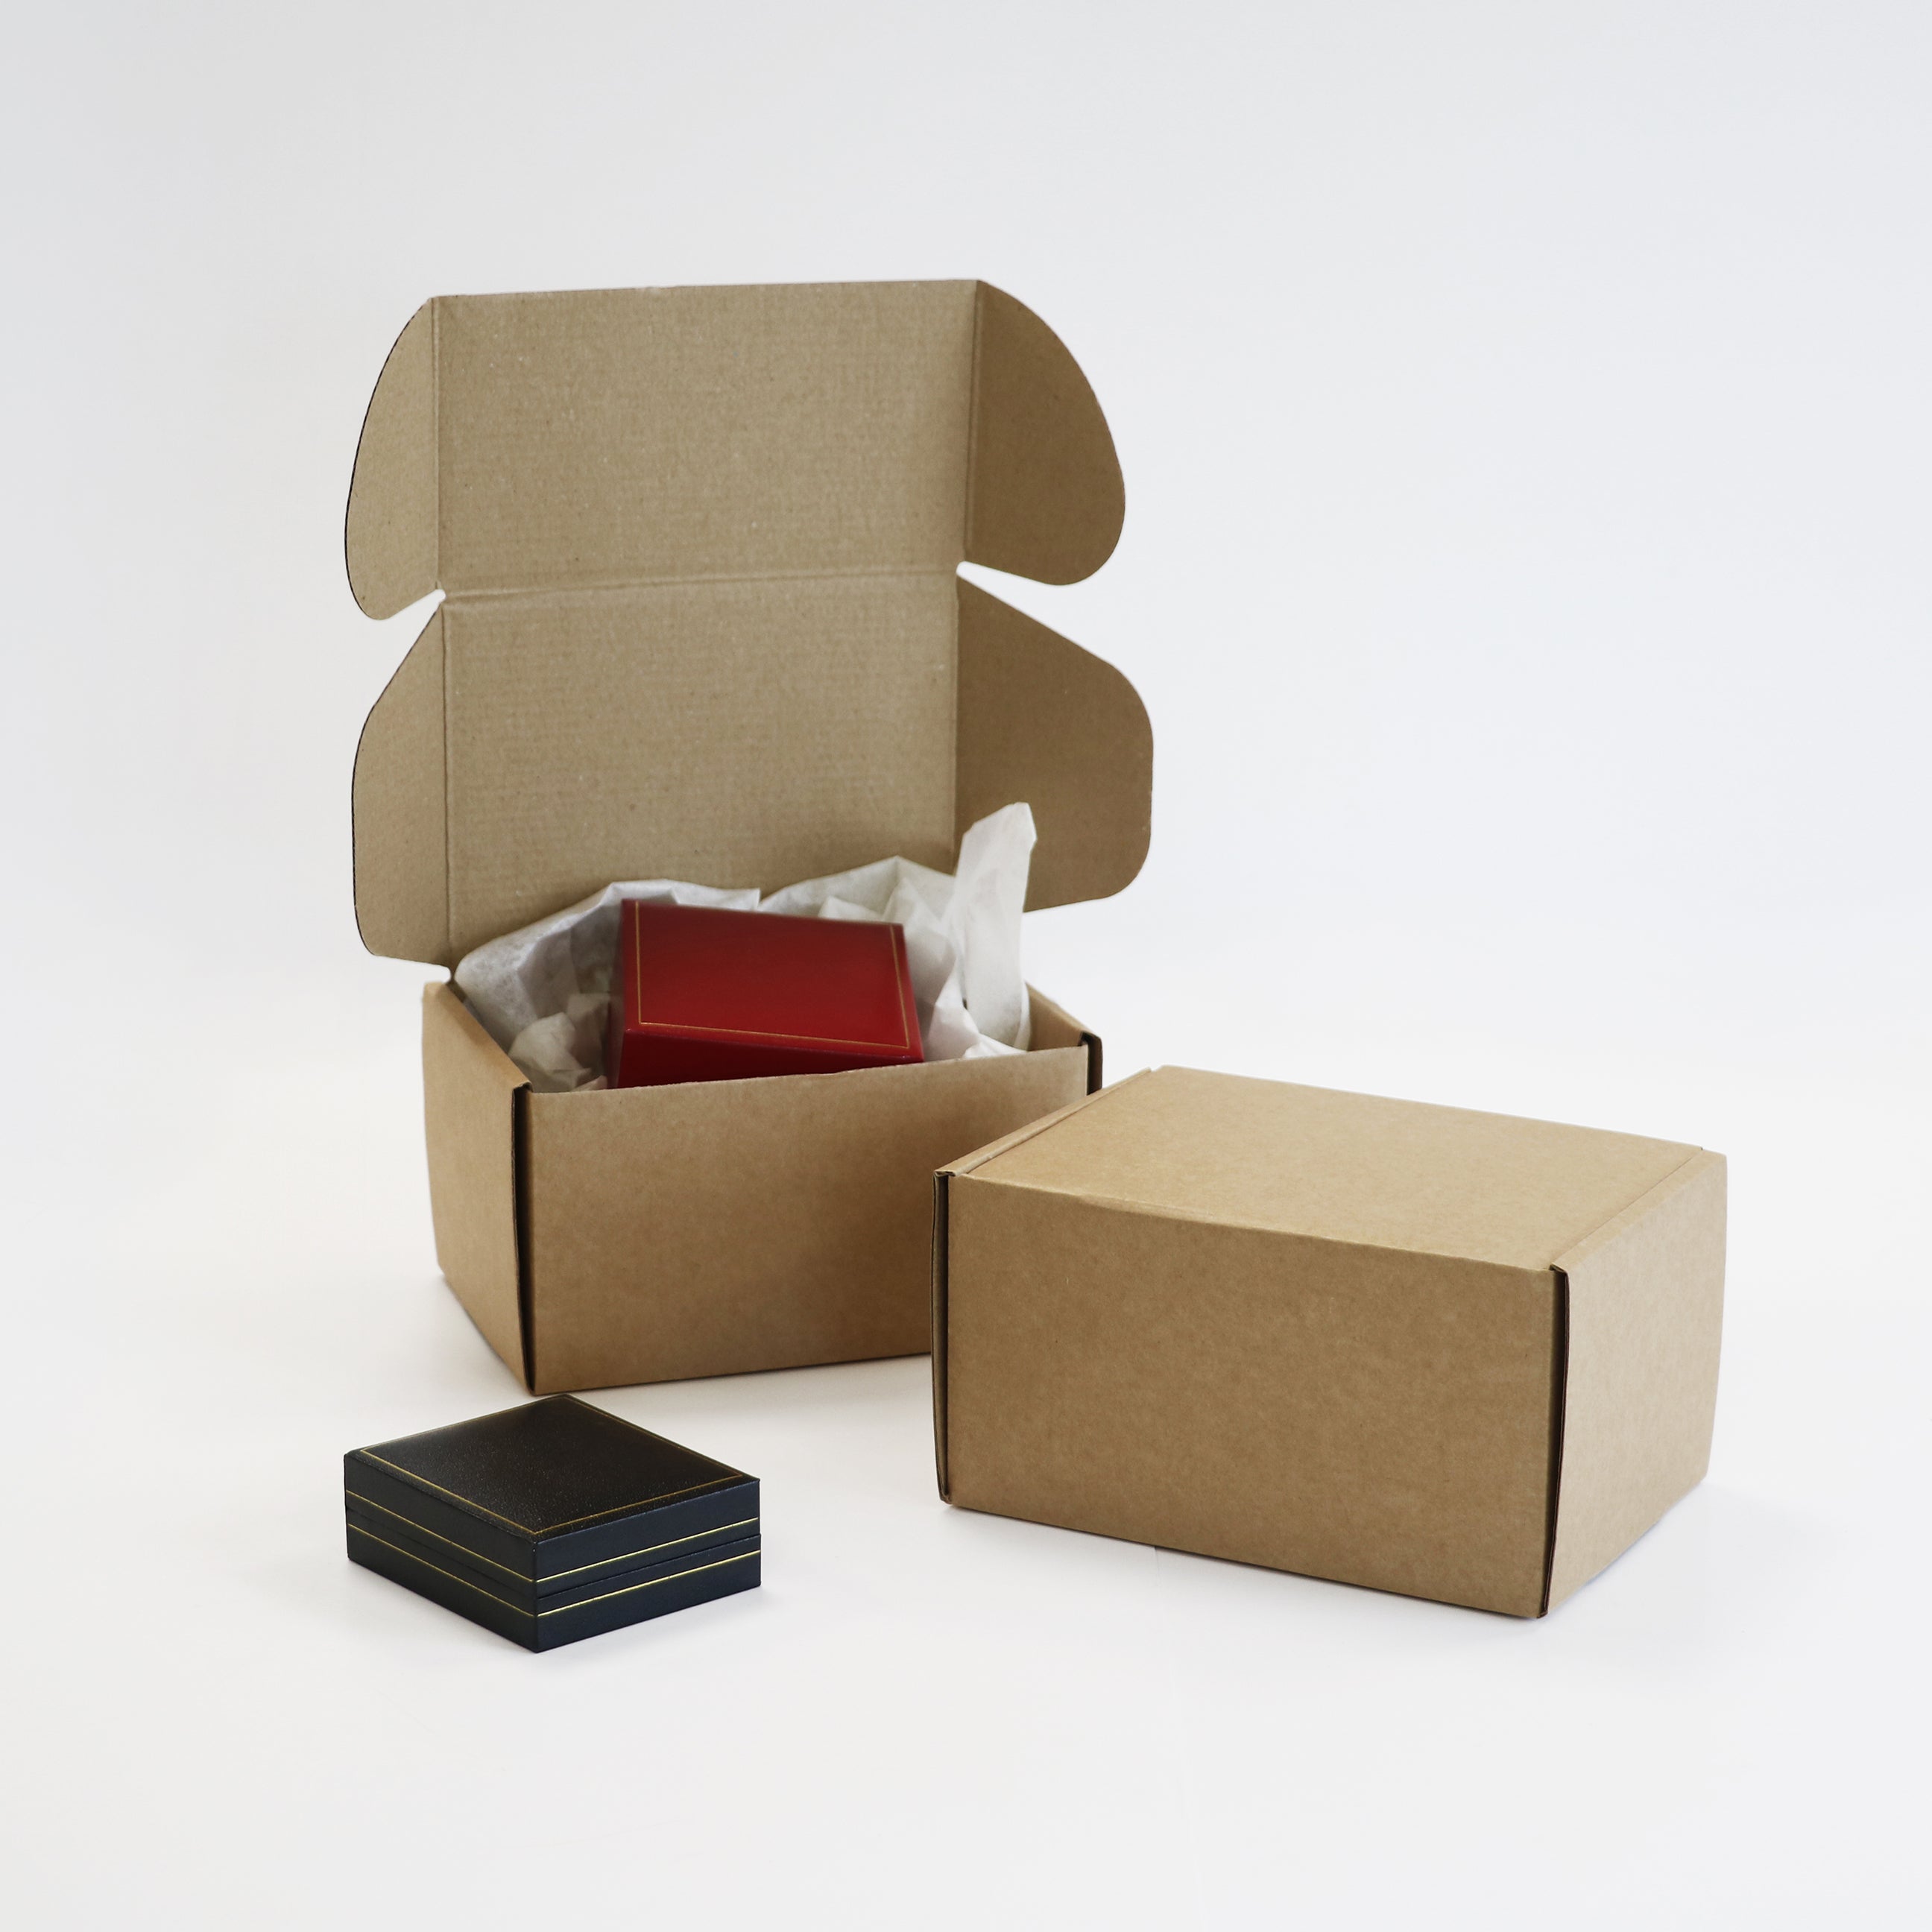 Plain Range Delivery Boxes, Small 150mm x 110mm x 85mm (Pk of 5